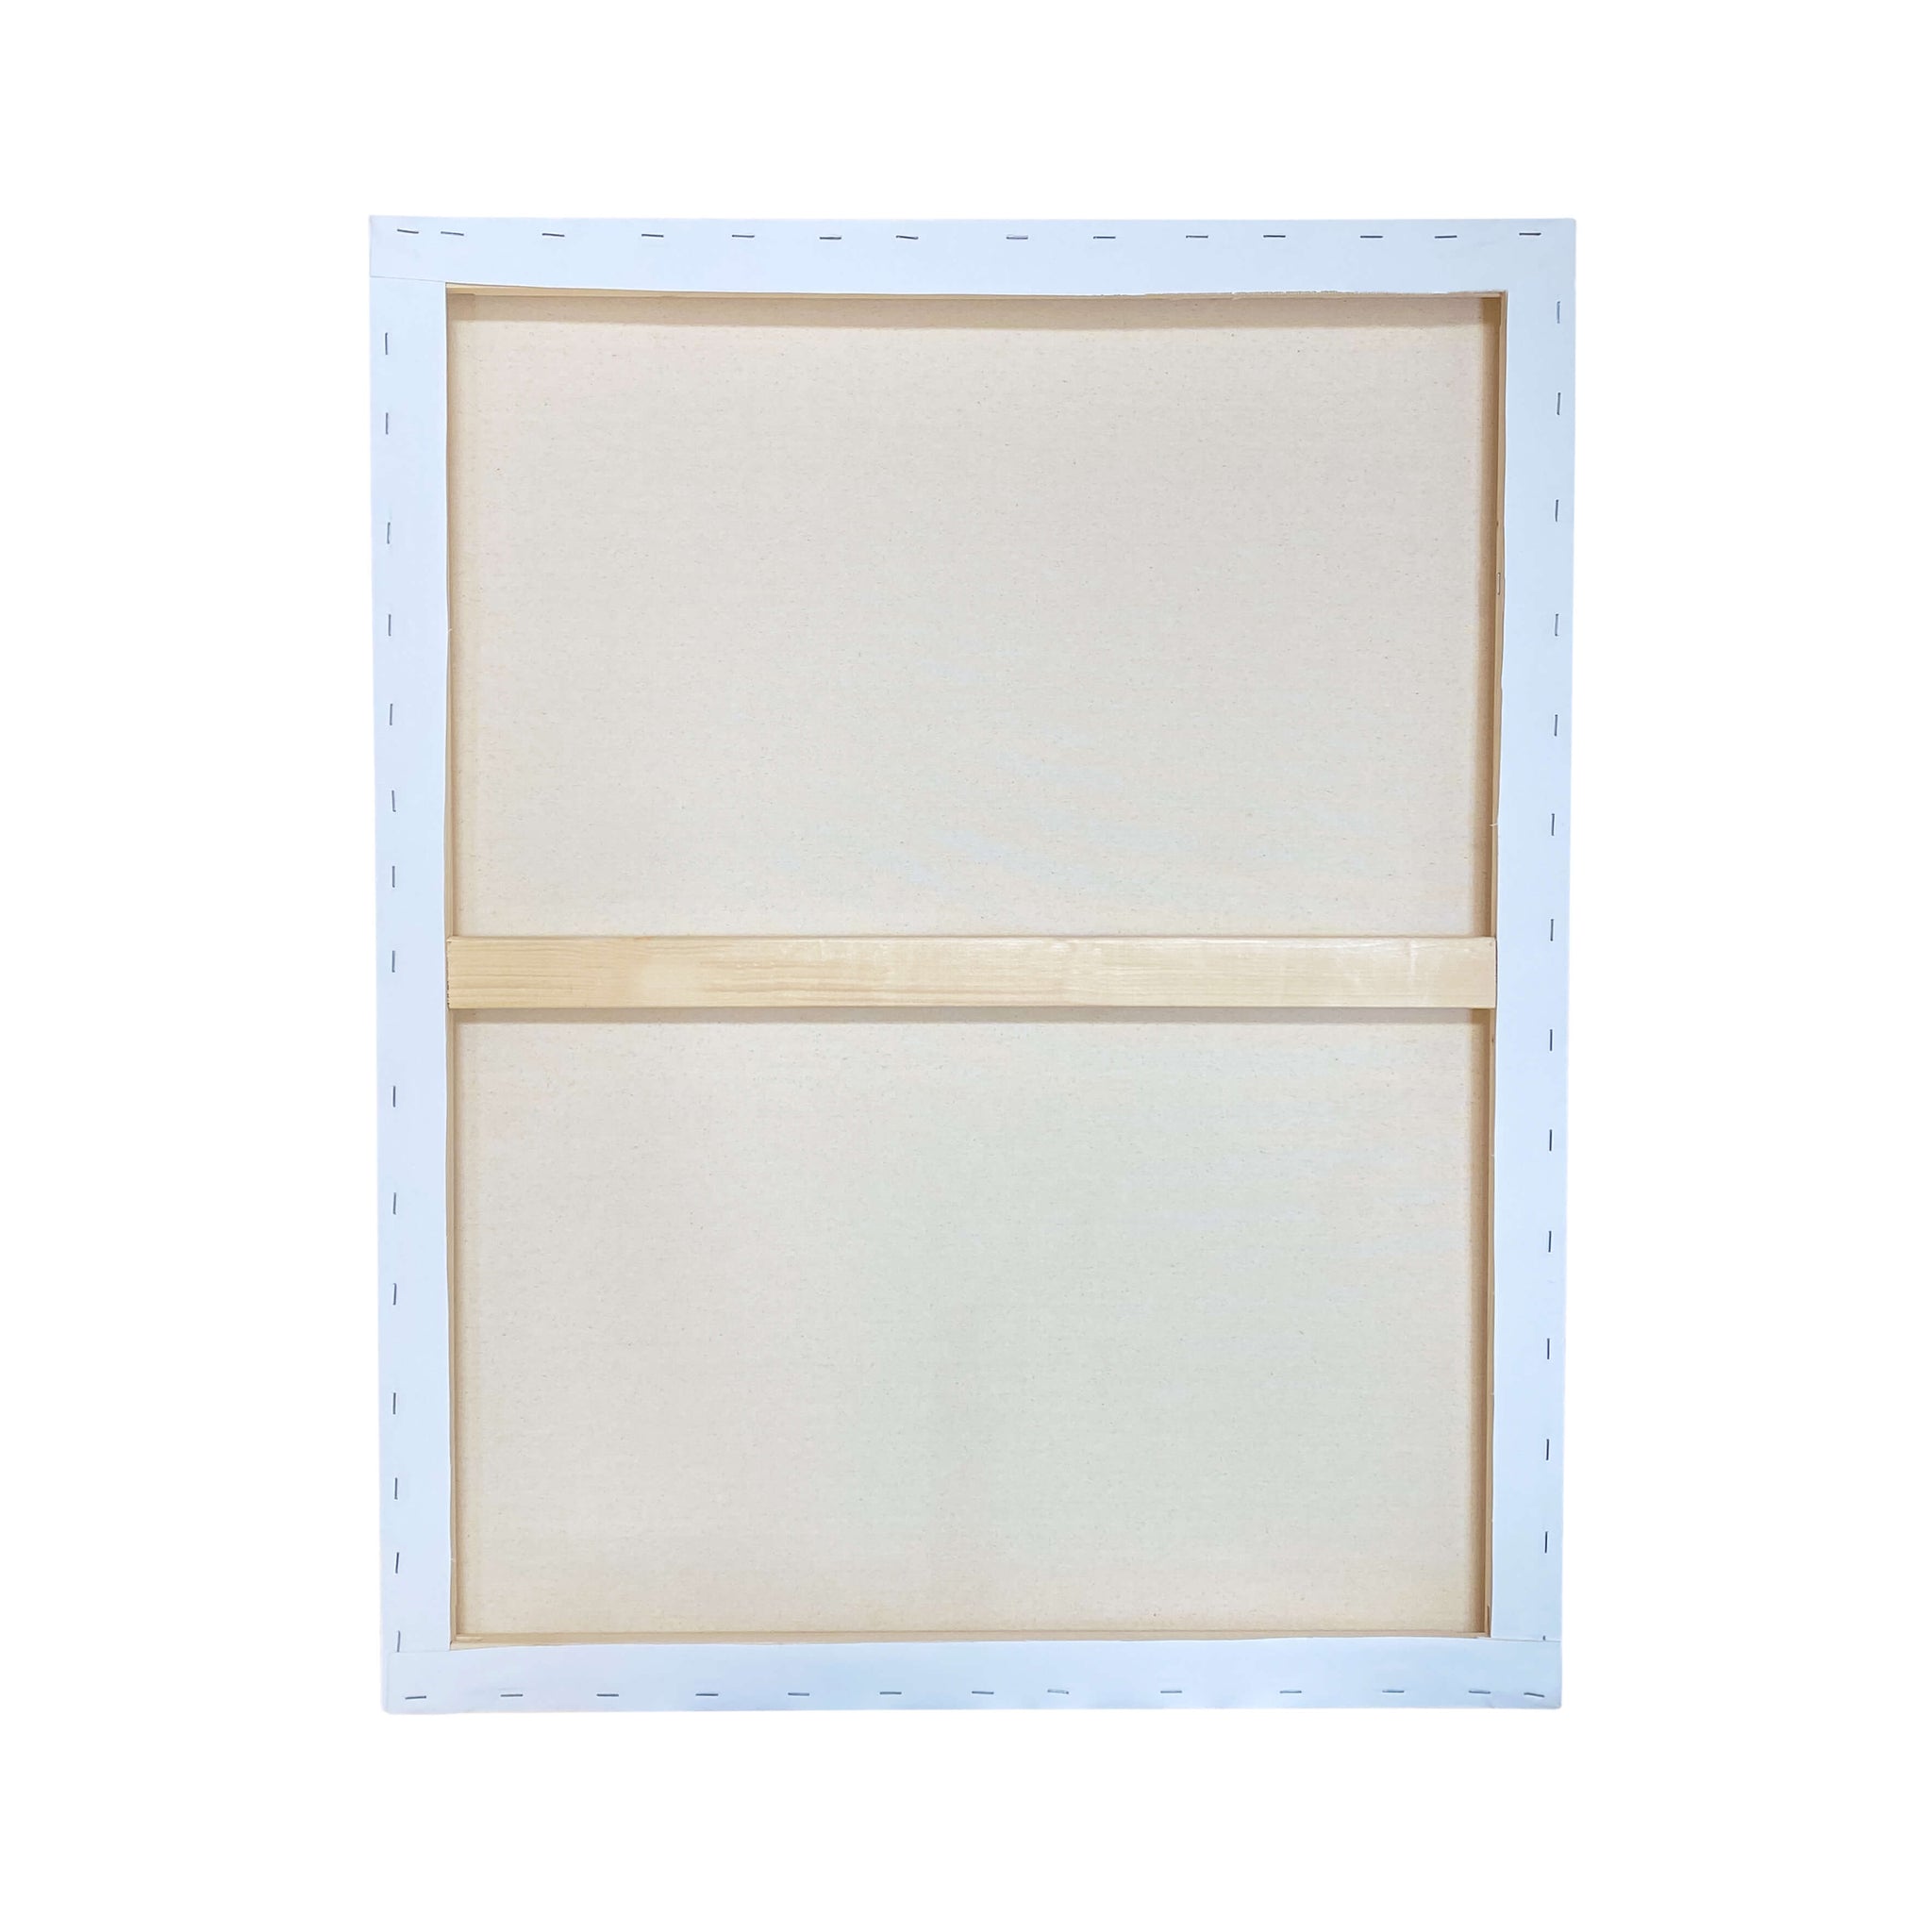 Pack of 4 Stretched Canvas for Painting 9x12 inch,24x30cm Primed